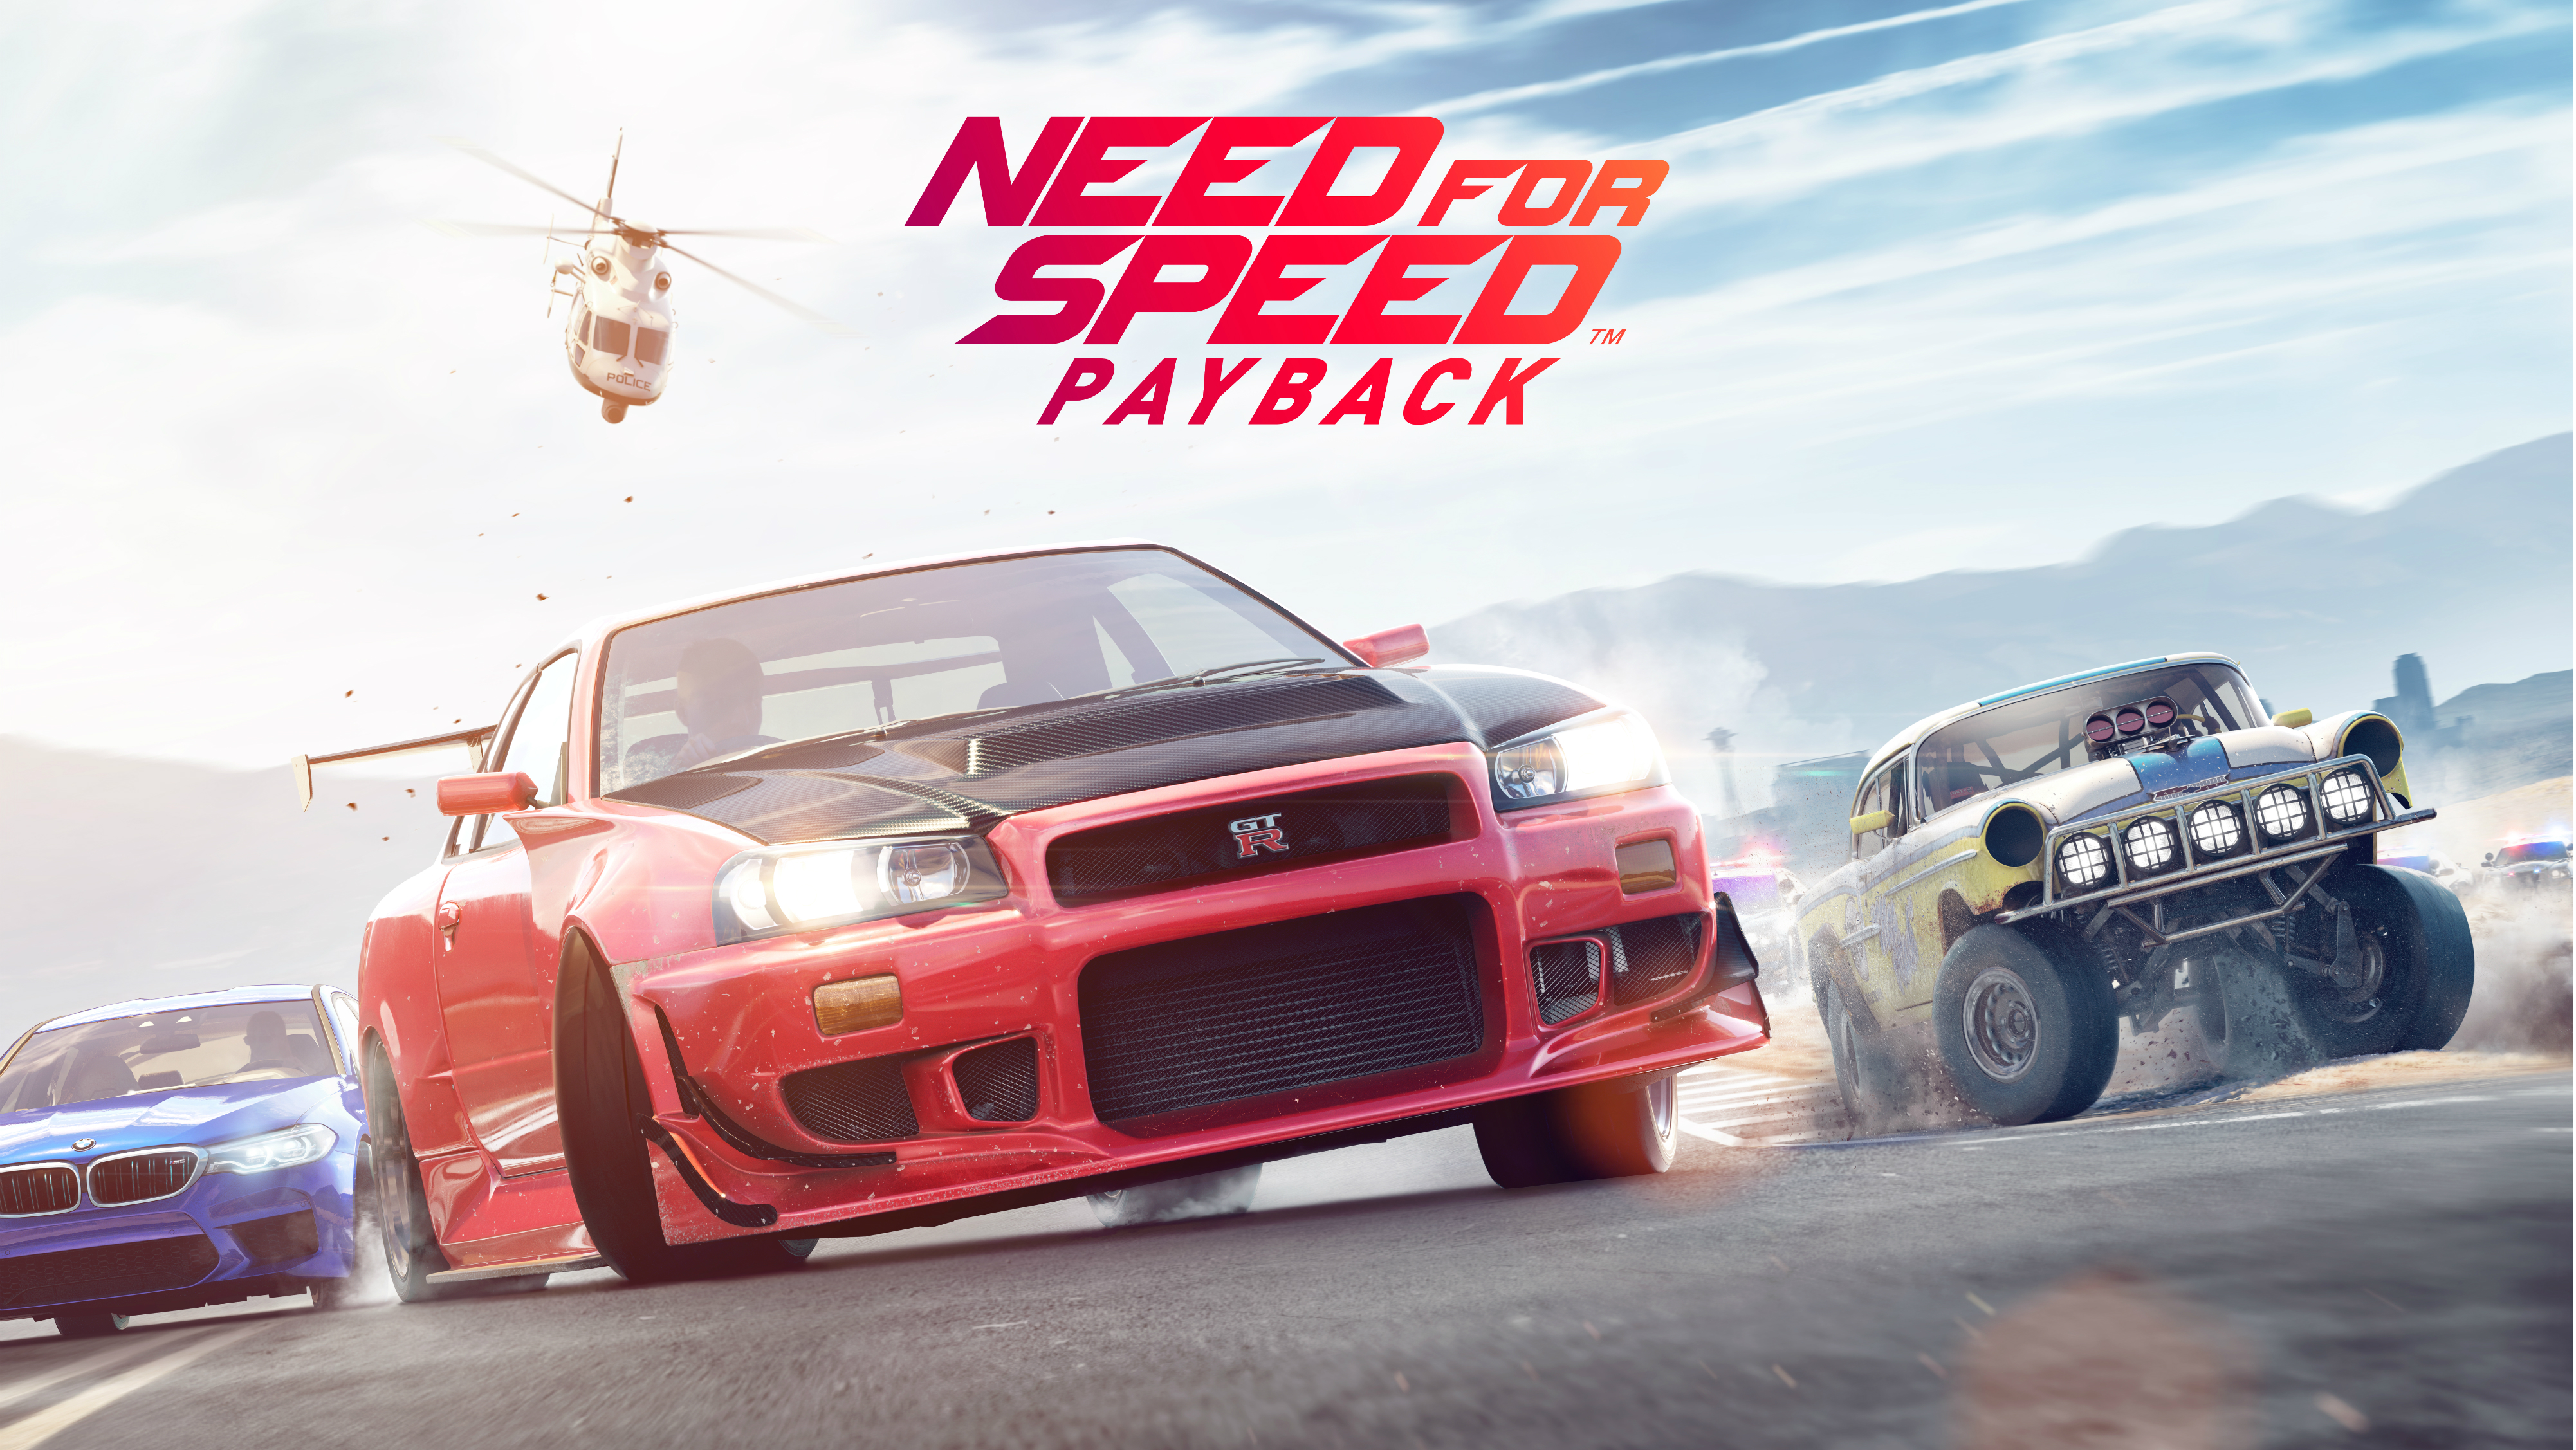 now i need speed payback